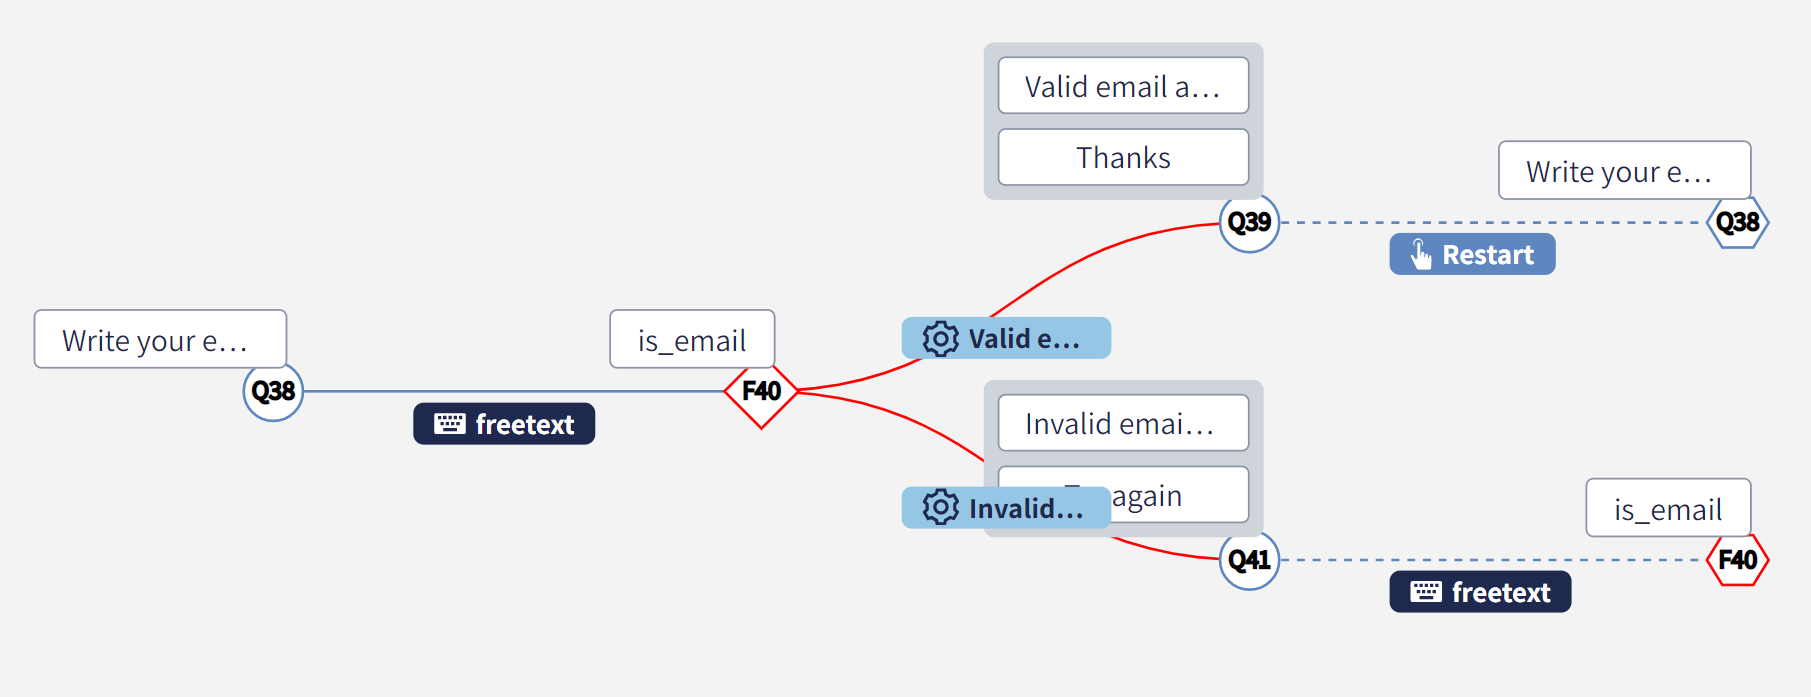 Example of loops in a conversational process